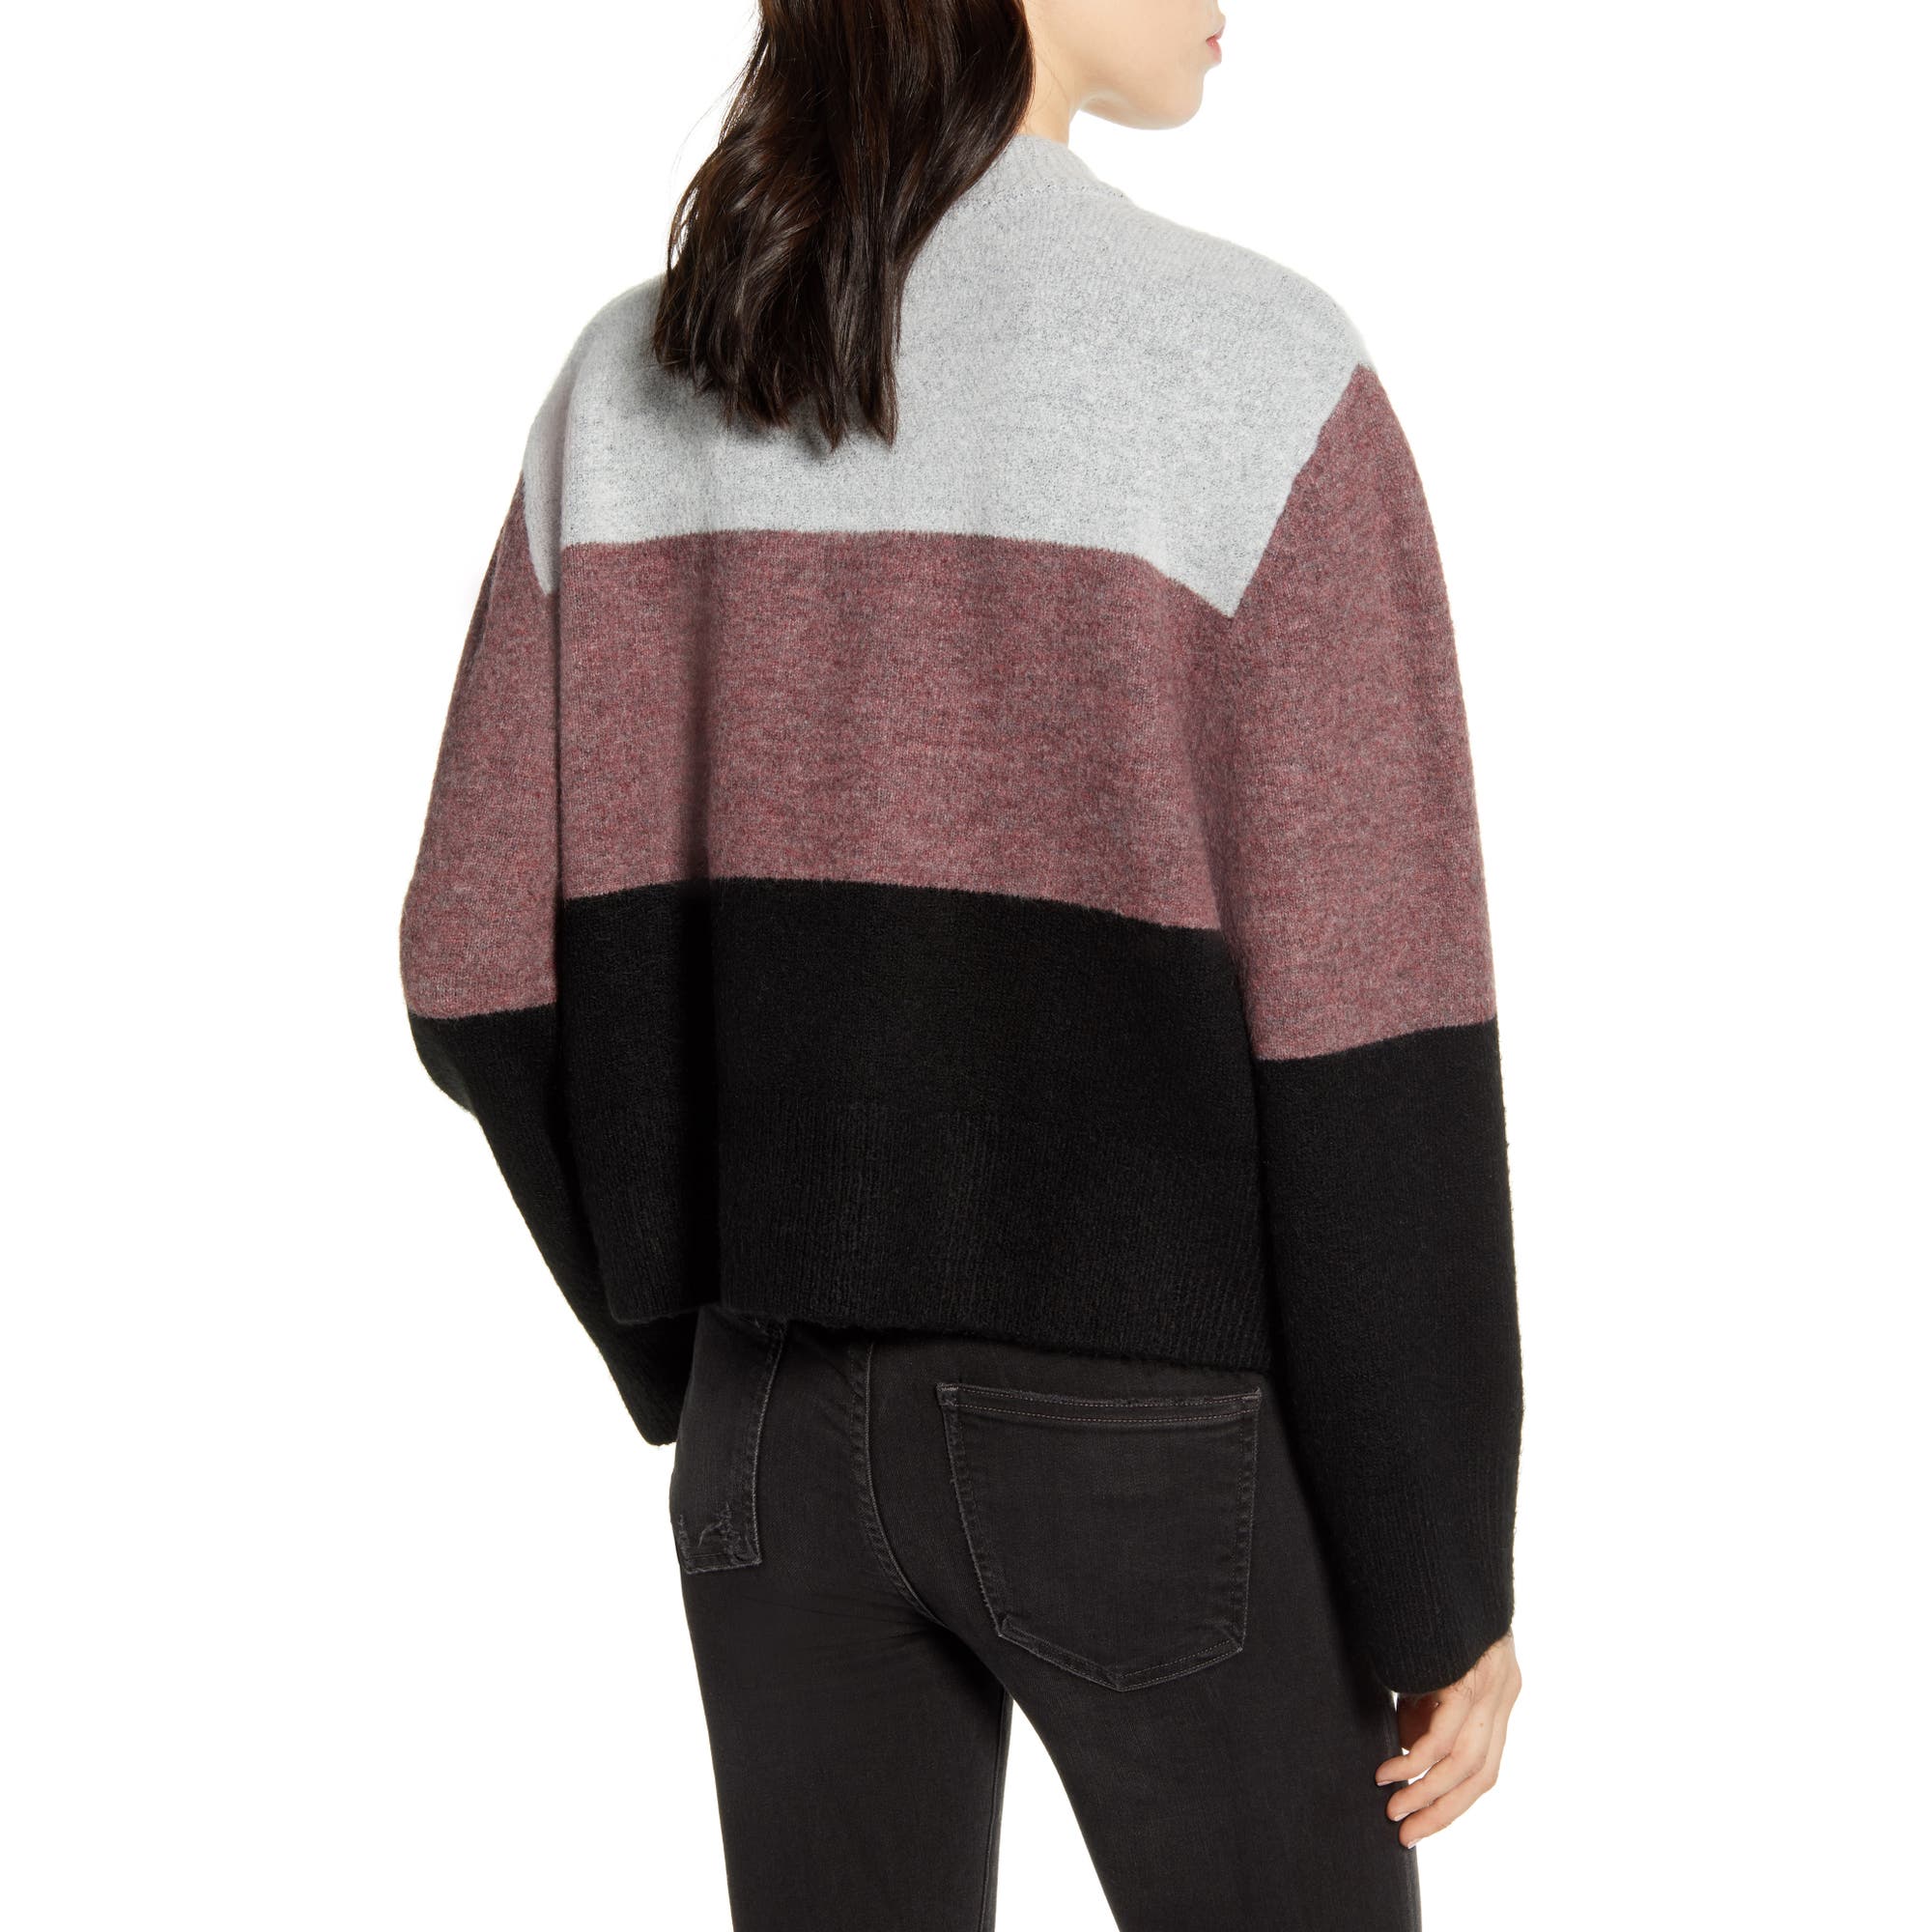 woocommerce-673321-2209615.cloudwaysapps.com-rebecca-minkoff-womens-miller-love-color-blocked-sweater